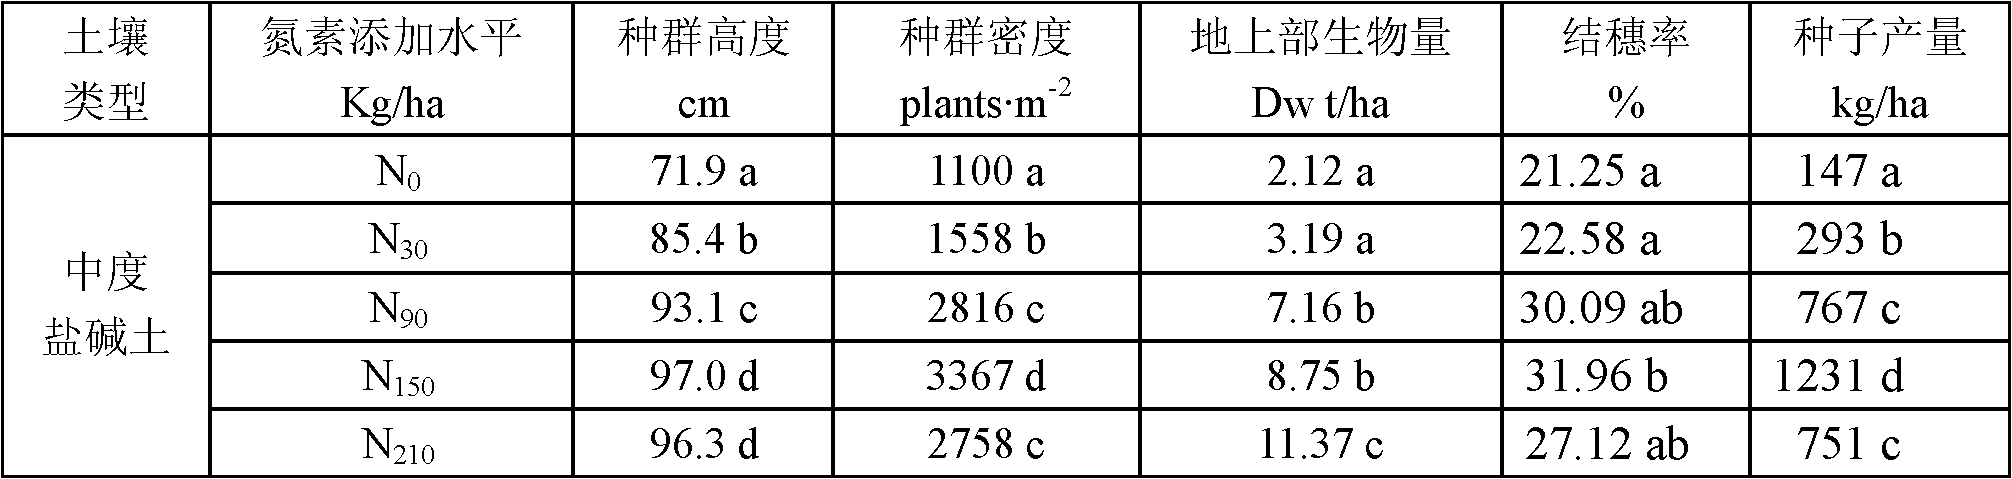 Method for improving Chinese wild rye biomass and seed yield of saline-alkali soil